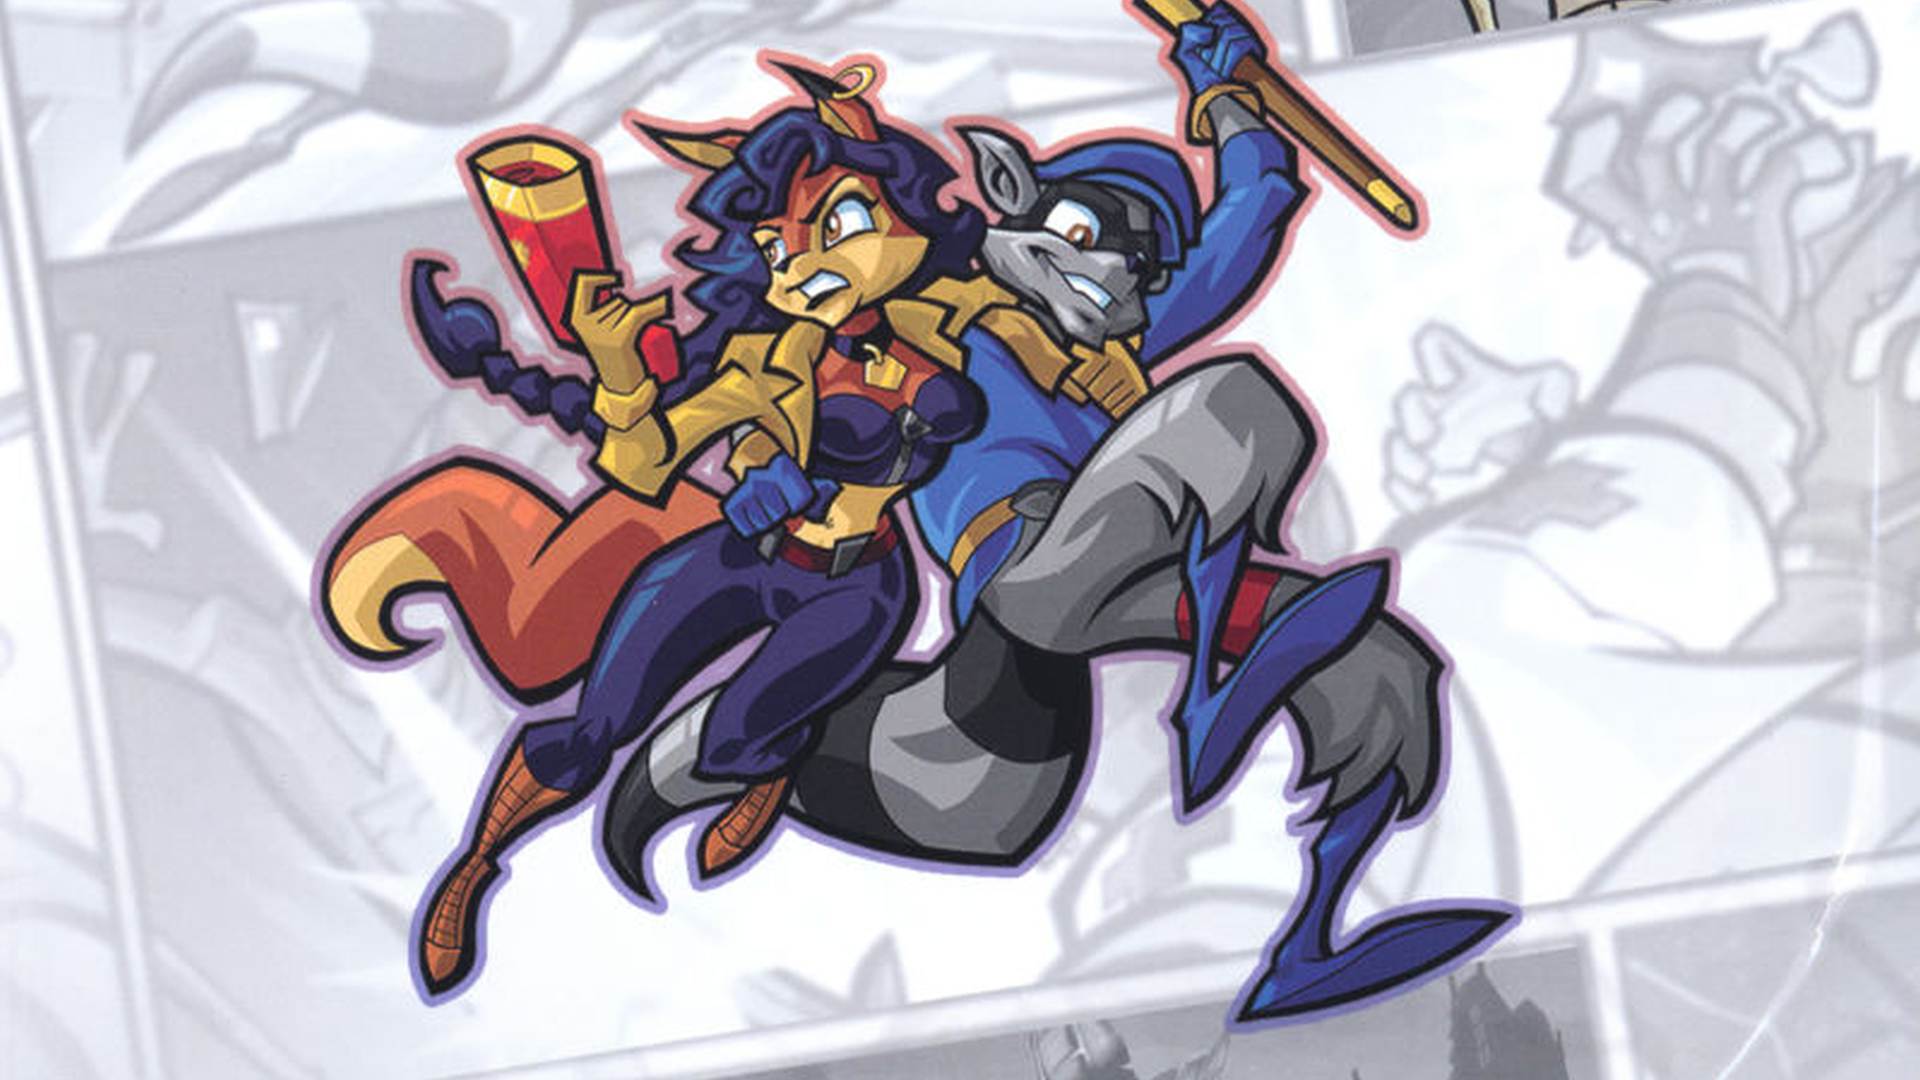 Punch says no Infamous Sly Cooper games in works